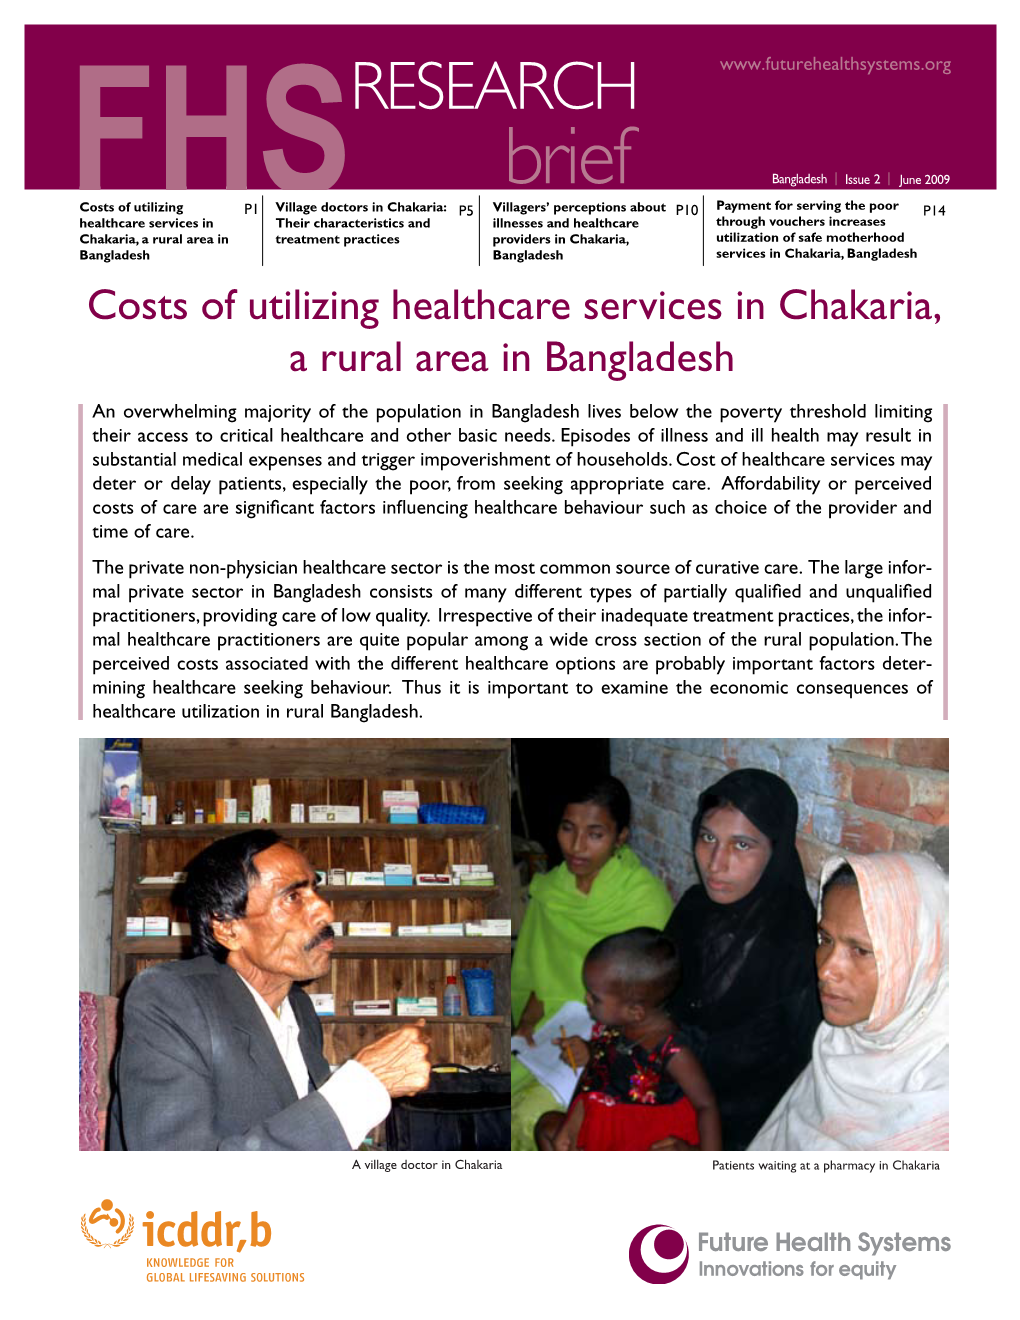 Costs of Utilizing Healthcare Services in Chakaria, a Rural Area in Bangladesh